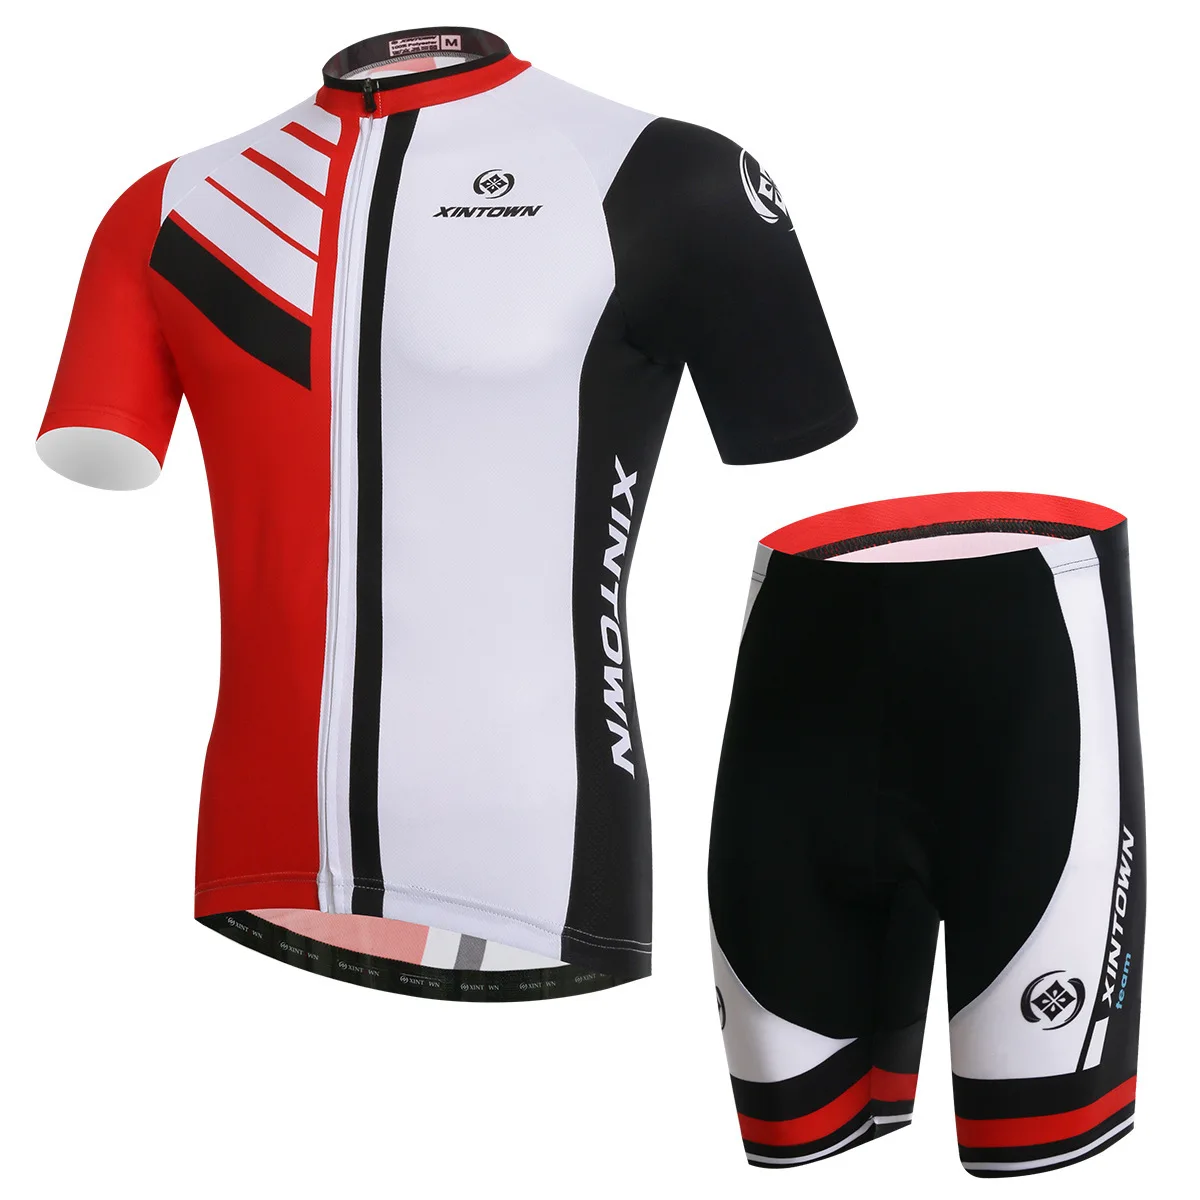 XINTOWN 2015new bipolar riding jersey short sleeved suit wear cycling ...